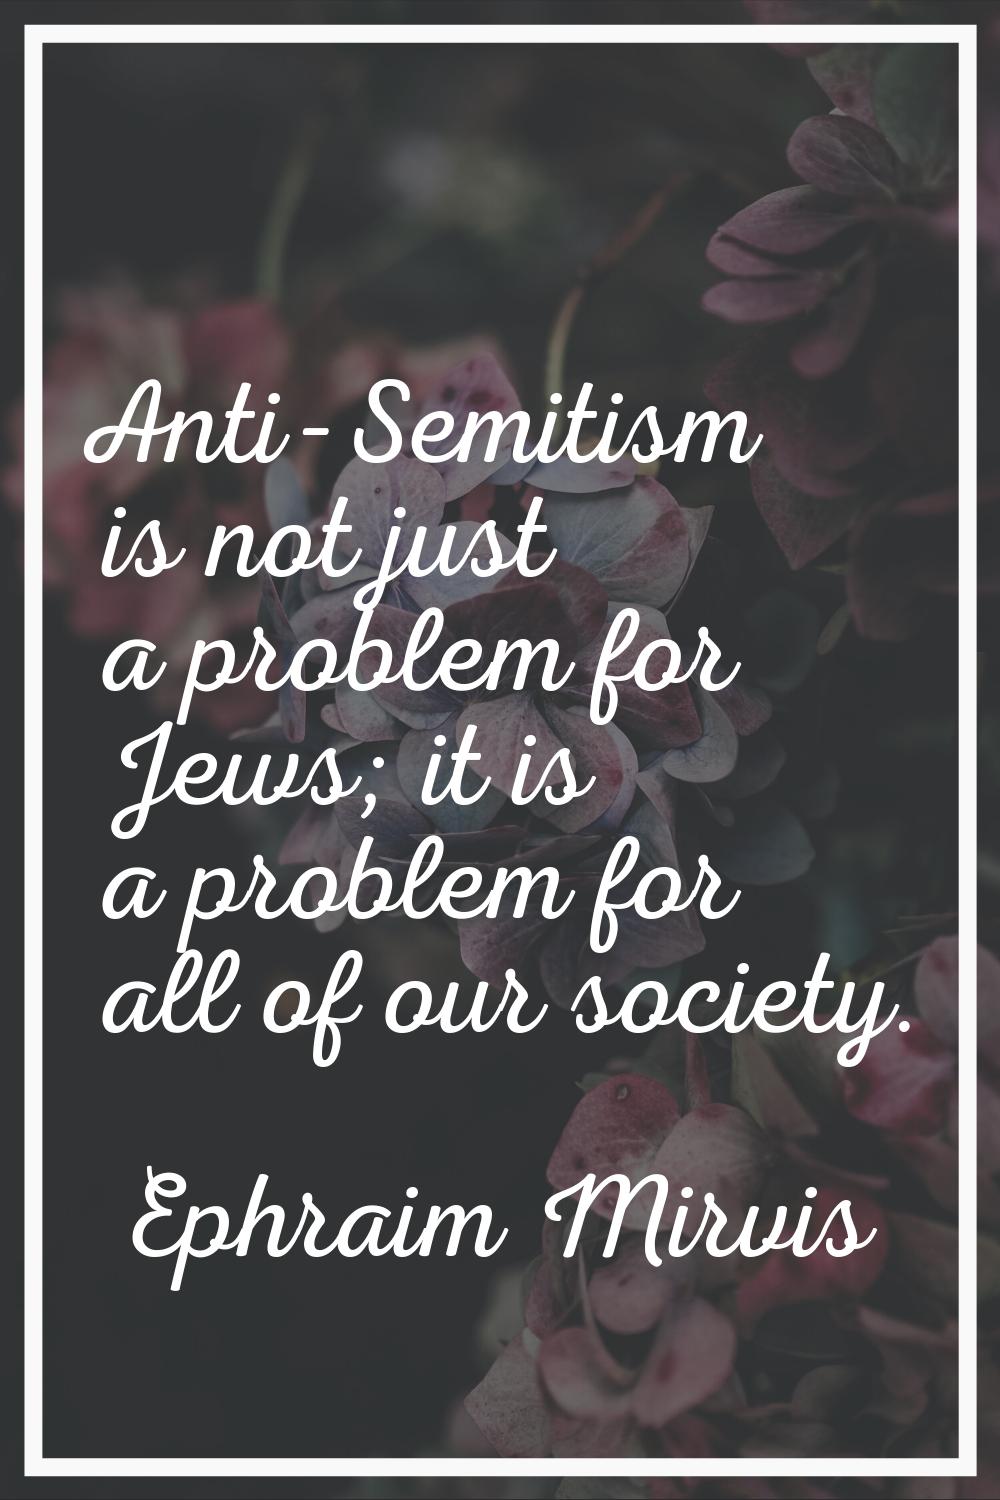 Anti-Semitism is not just a problem for Jews; it is a problem for all of our society.